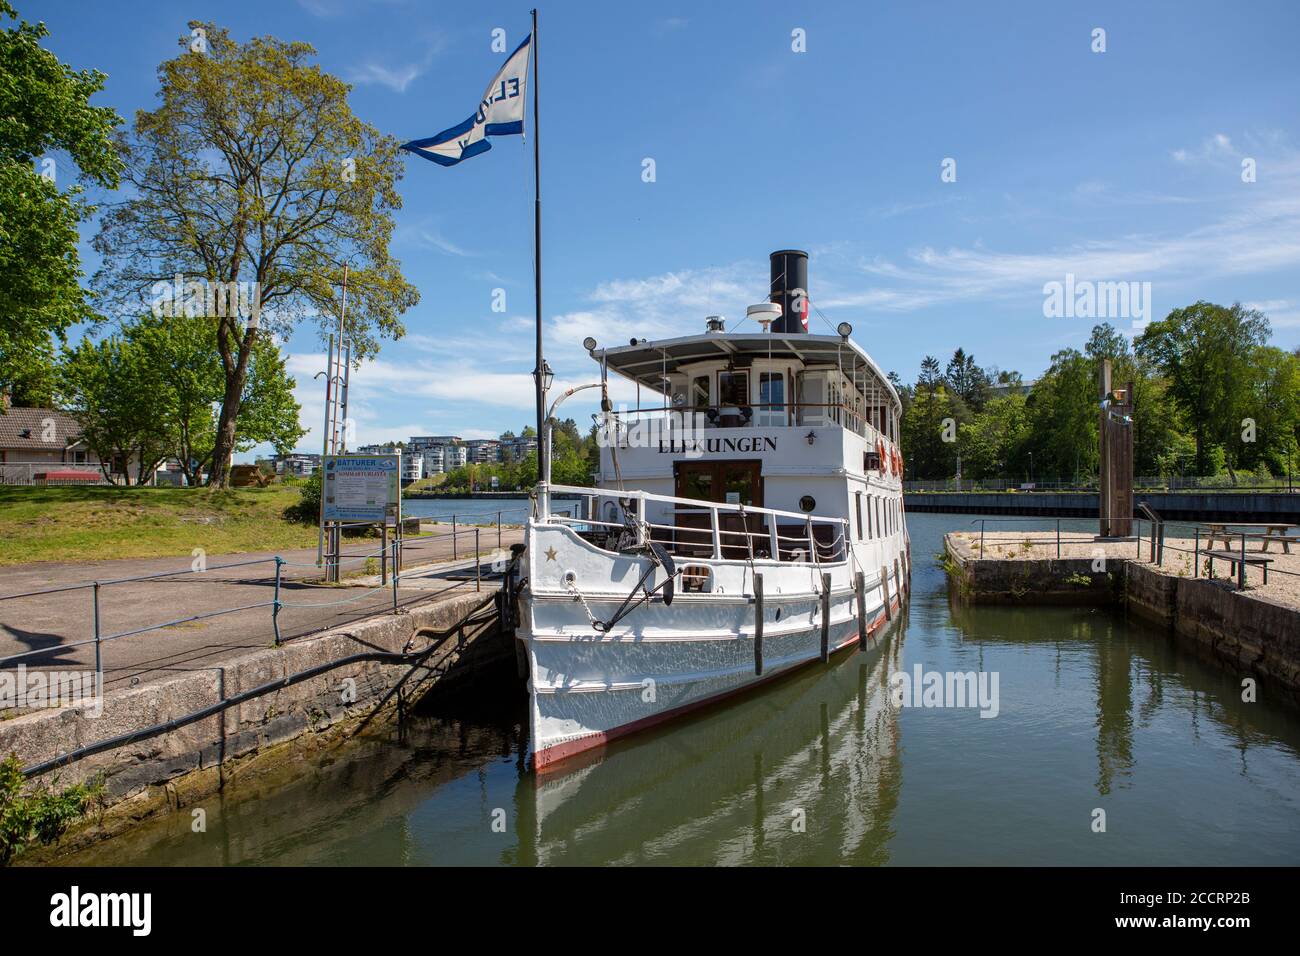 TROLLHATTAN, TSWEDEN - MAY 31, 2019: The river boat Elfkungen is located nearby the old locks of Trollhattan and is popular for tourists to visit. Stock Photo